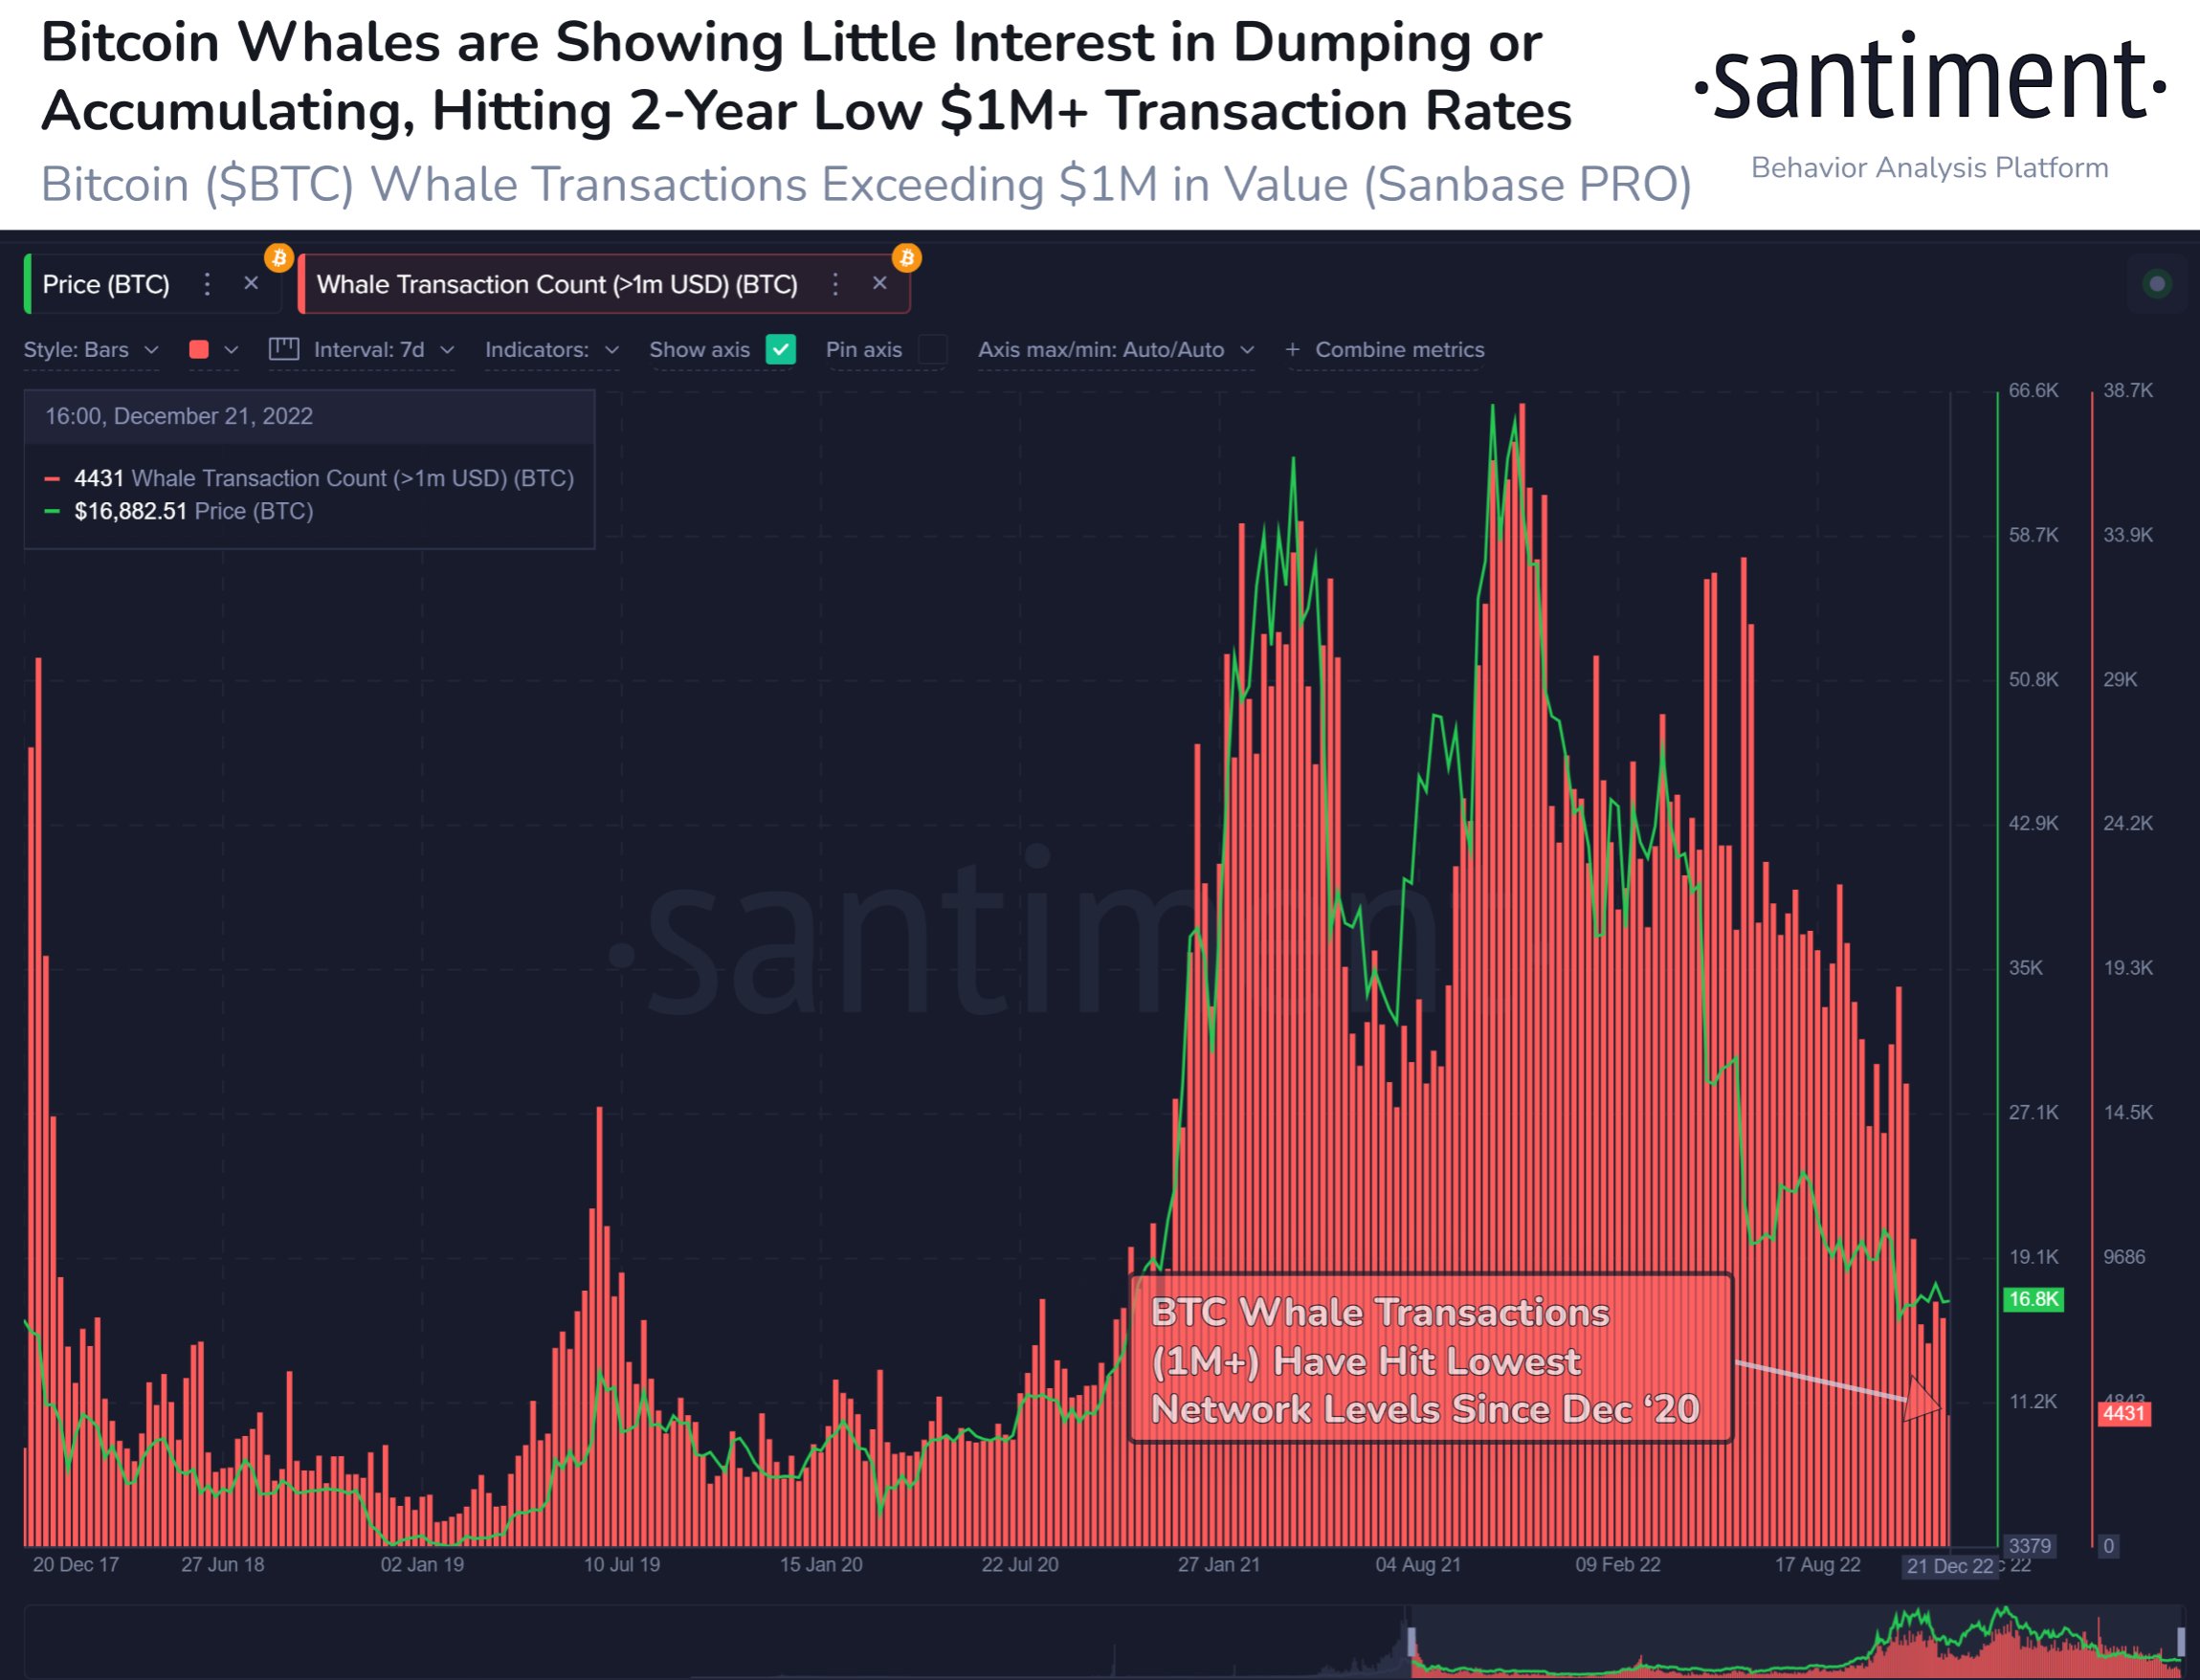 Bitcoin whale transactions worth $1 million hit lowest point